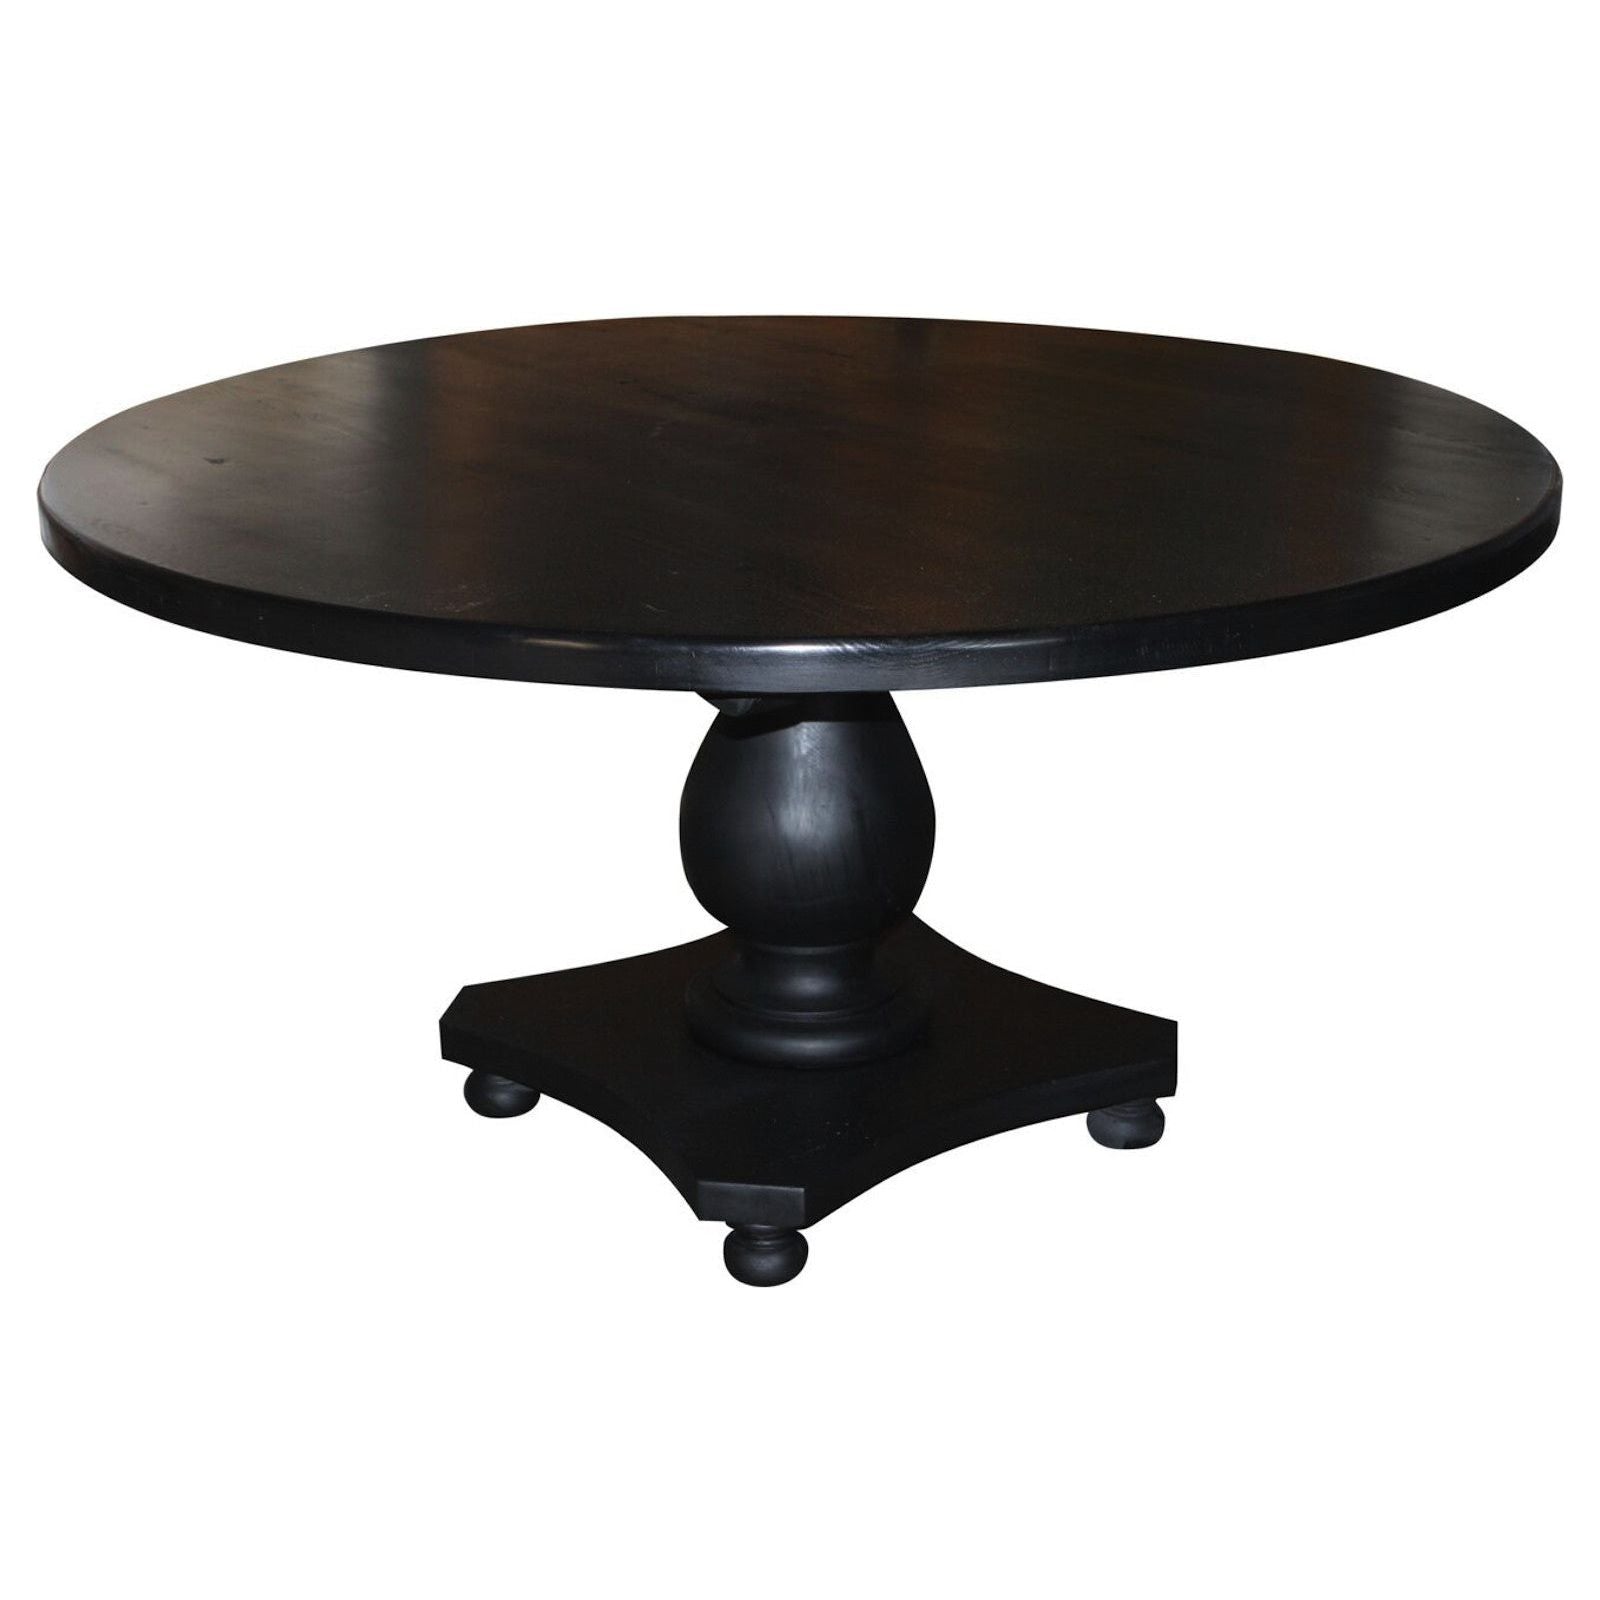 Round Pedestal Salvaged Wood Dining Table Mortise Tenon